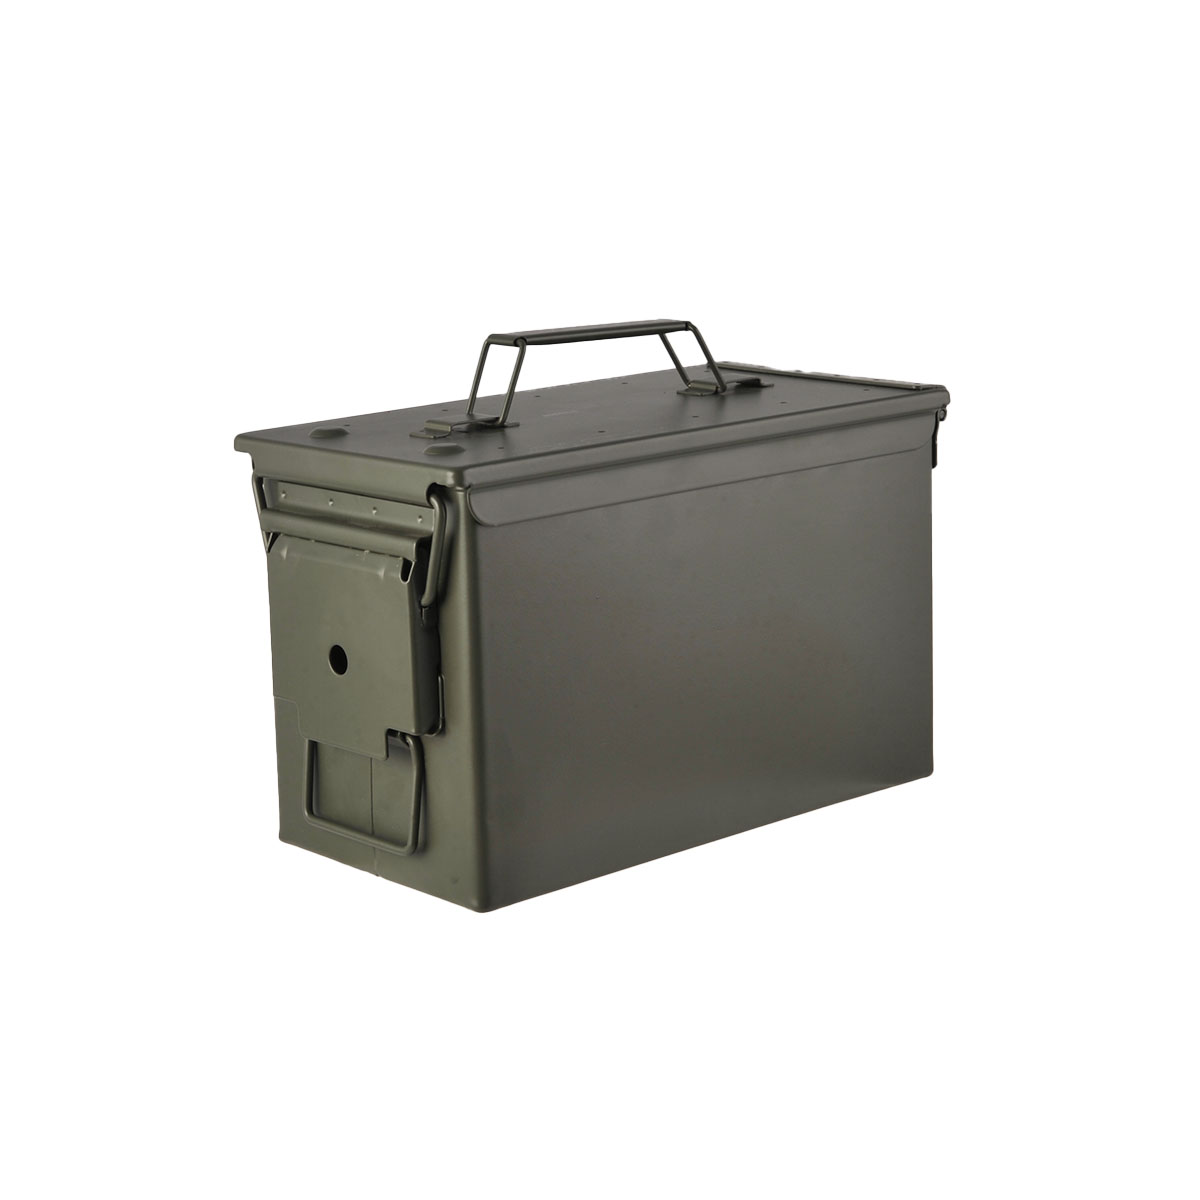 BROWNELLS - M2A1 50 CAL AMMO CAN STEEL OD GREEN